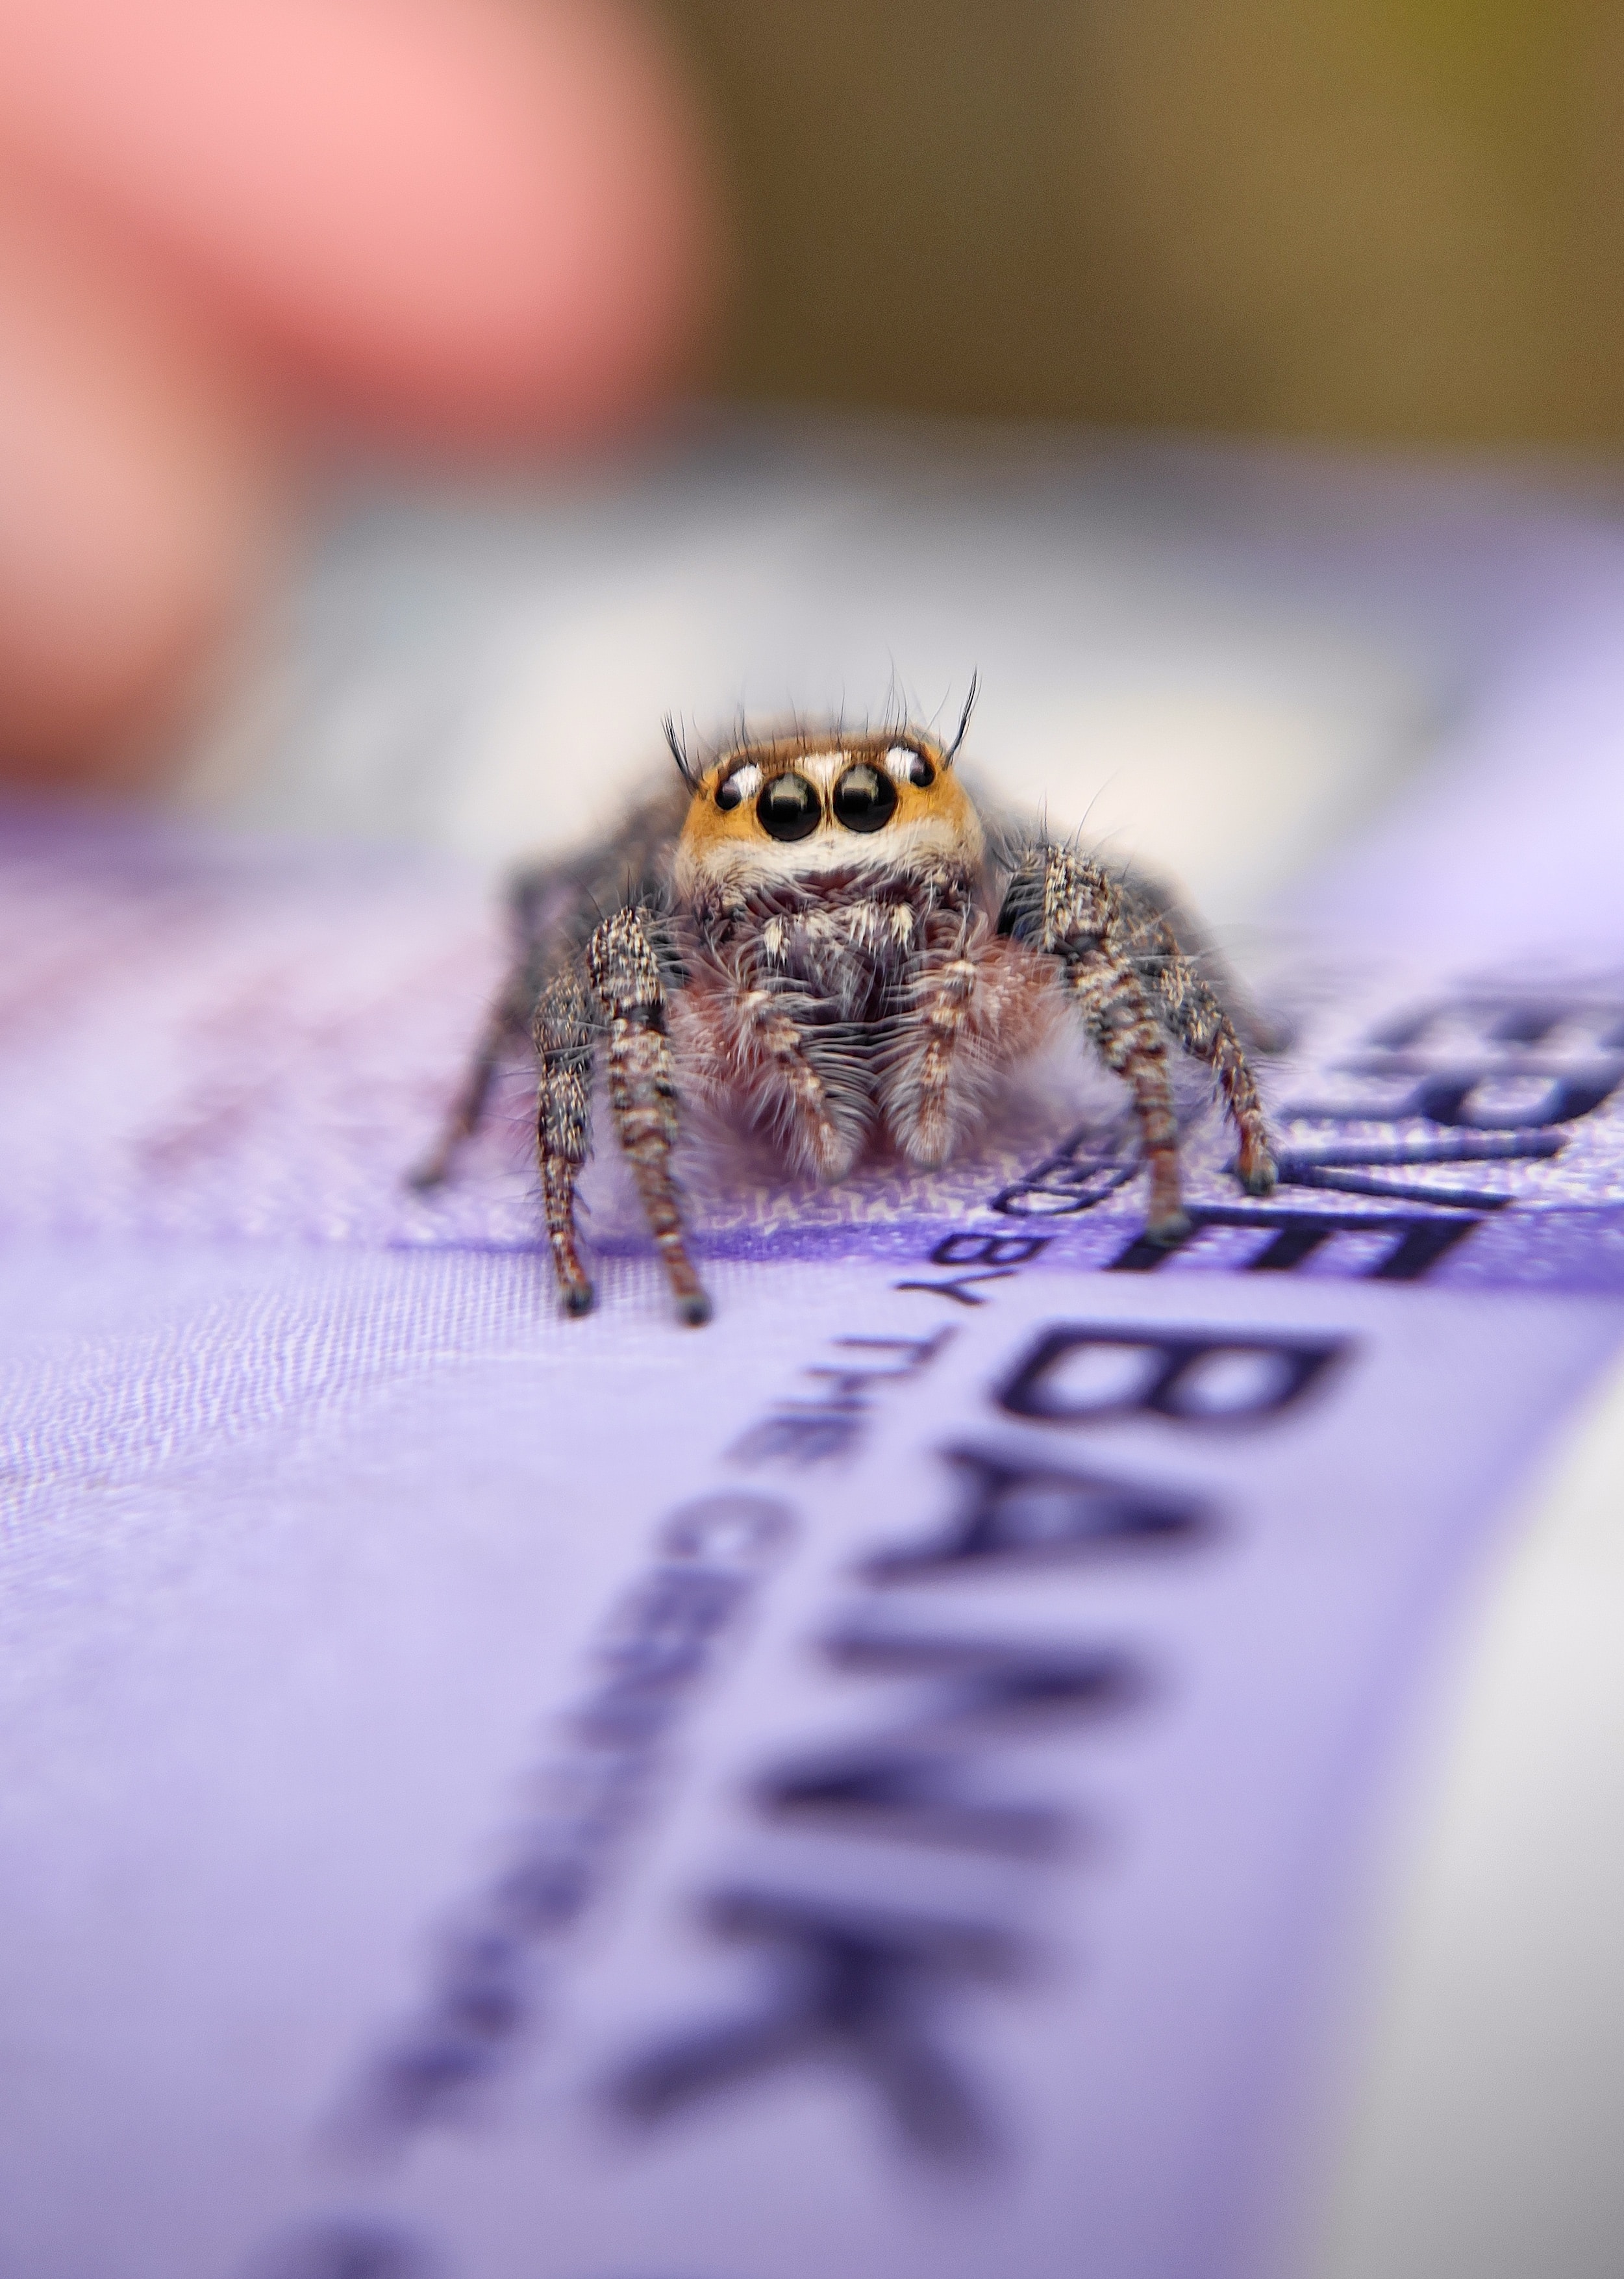 Facts about Jumping Spiders